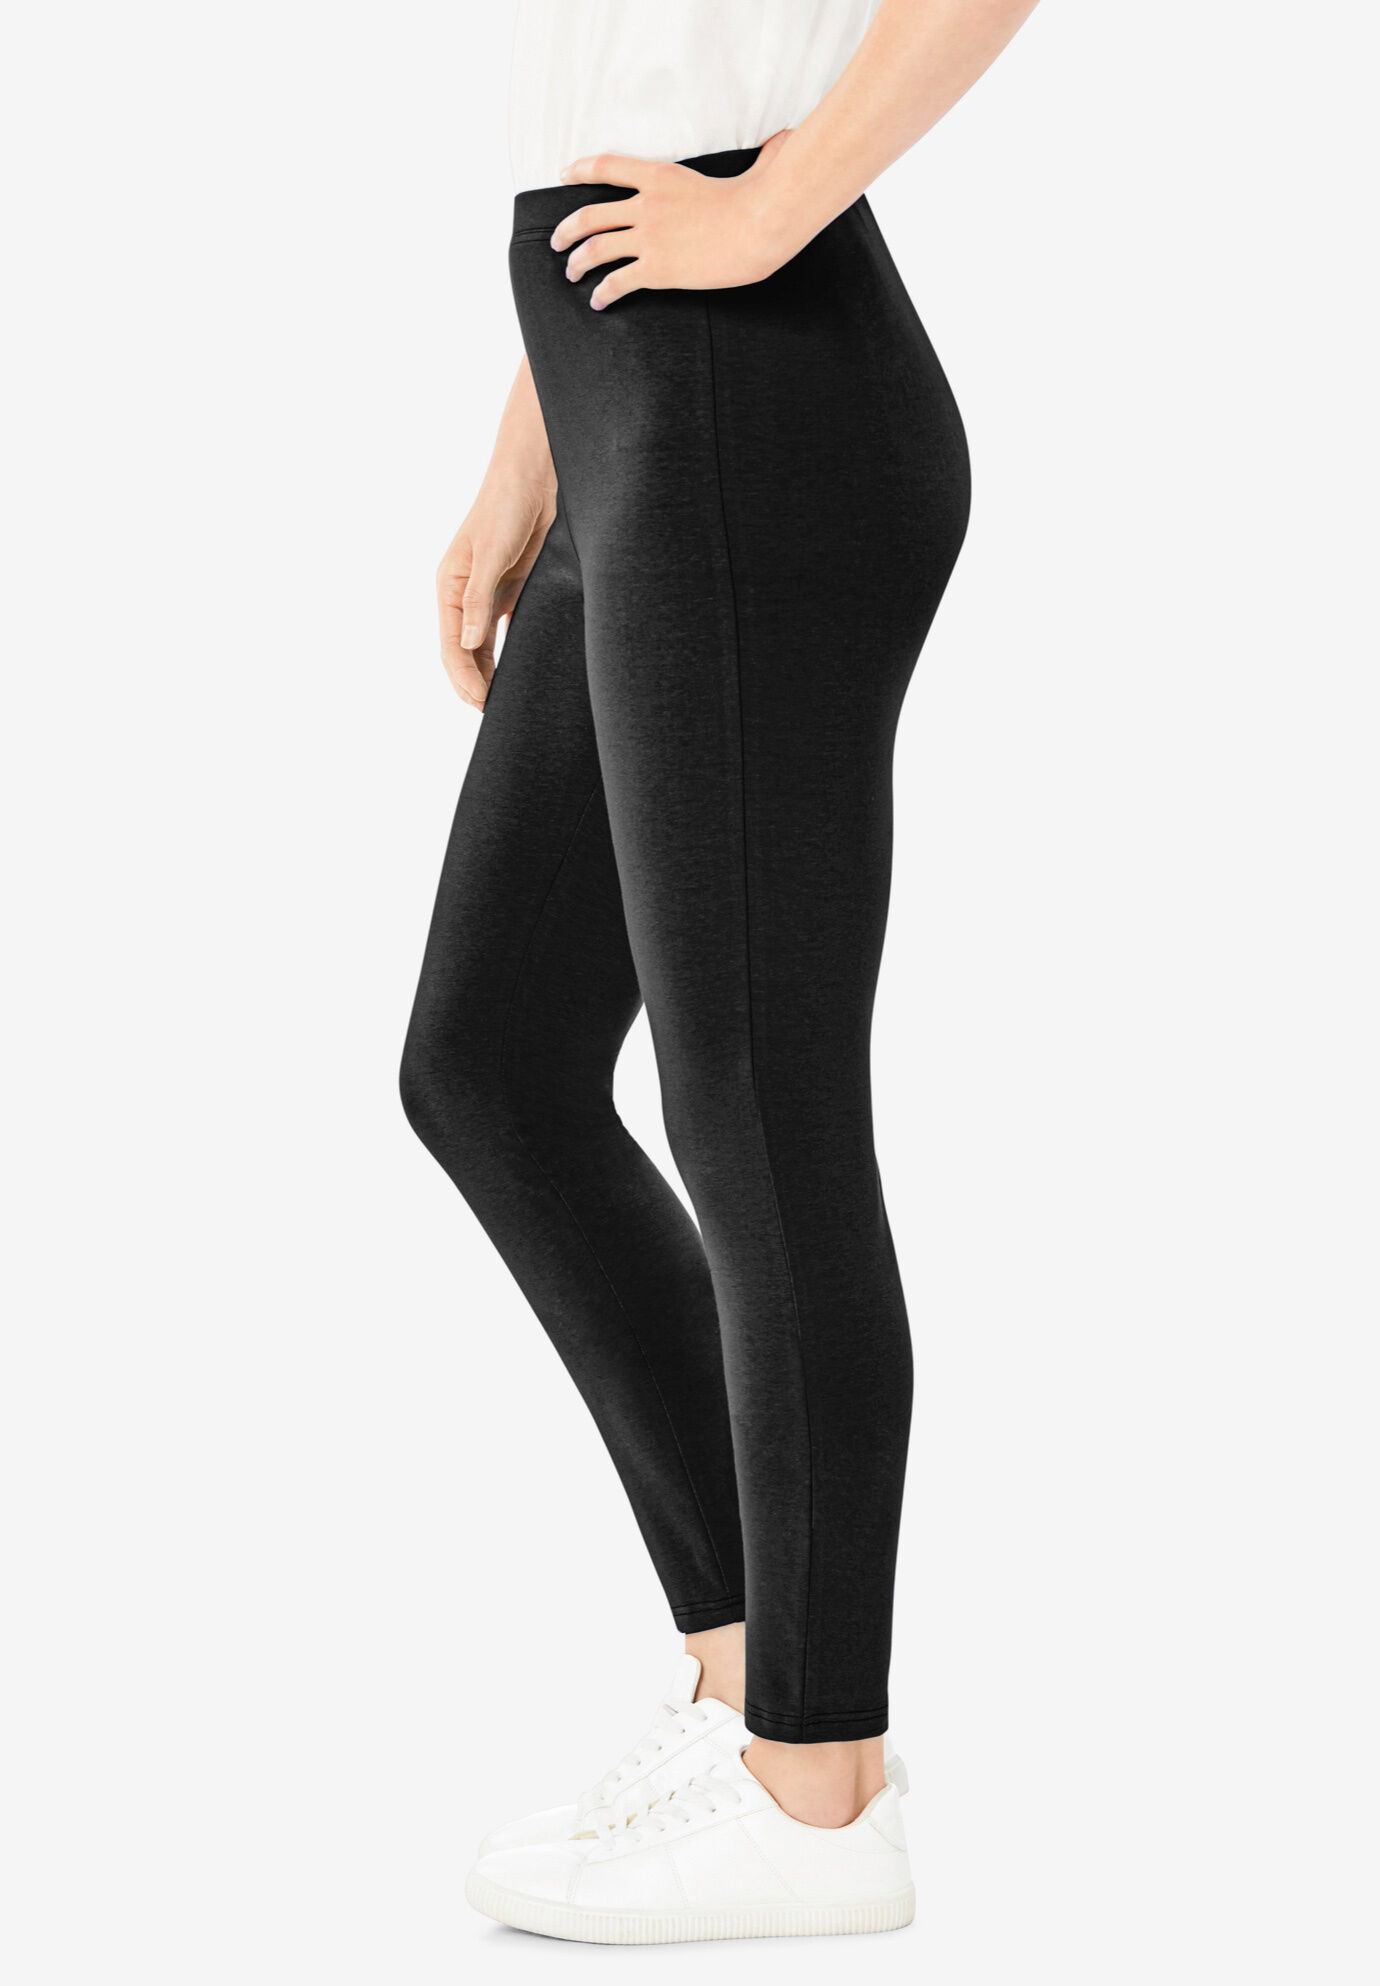 Women's Stretchy Cotton legging,Black – All Brands Factory Outlet